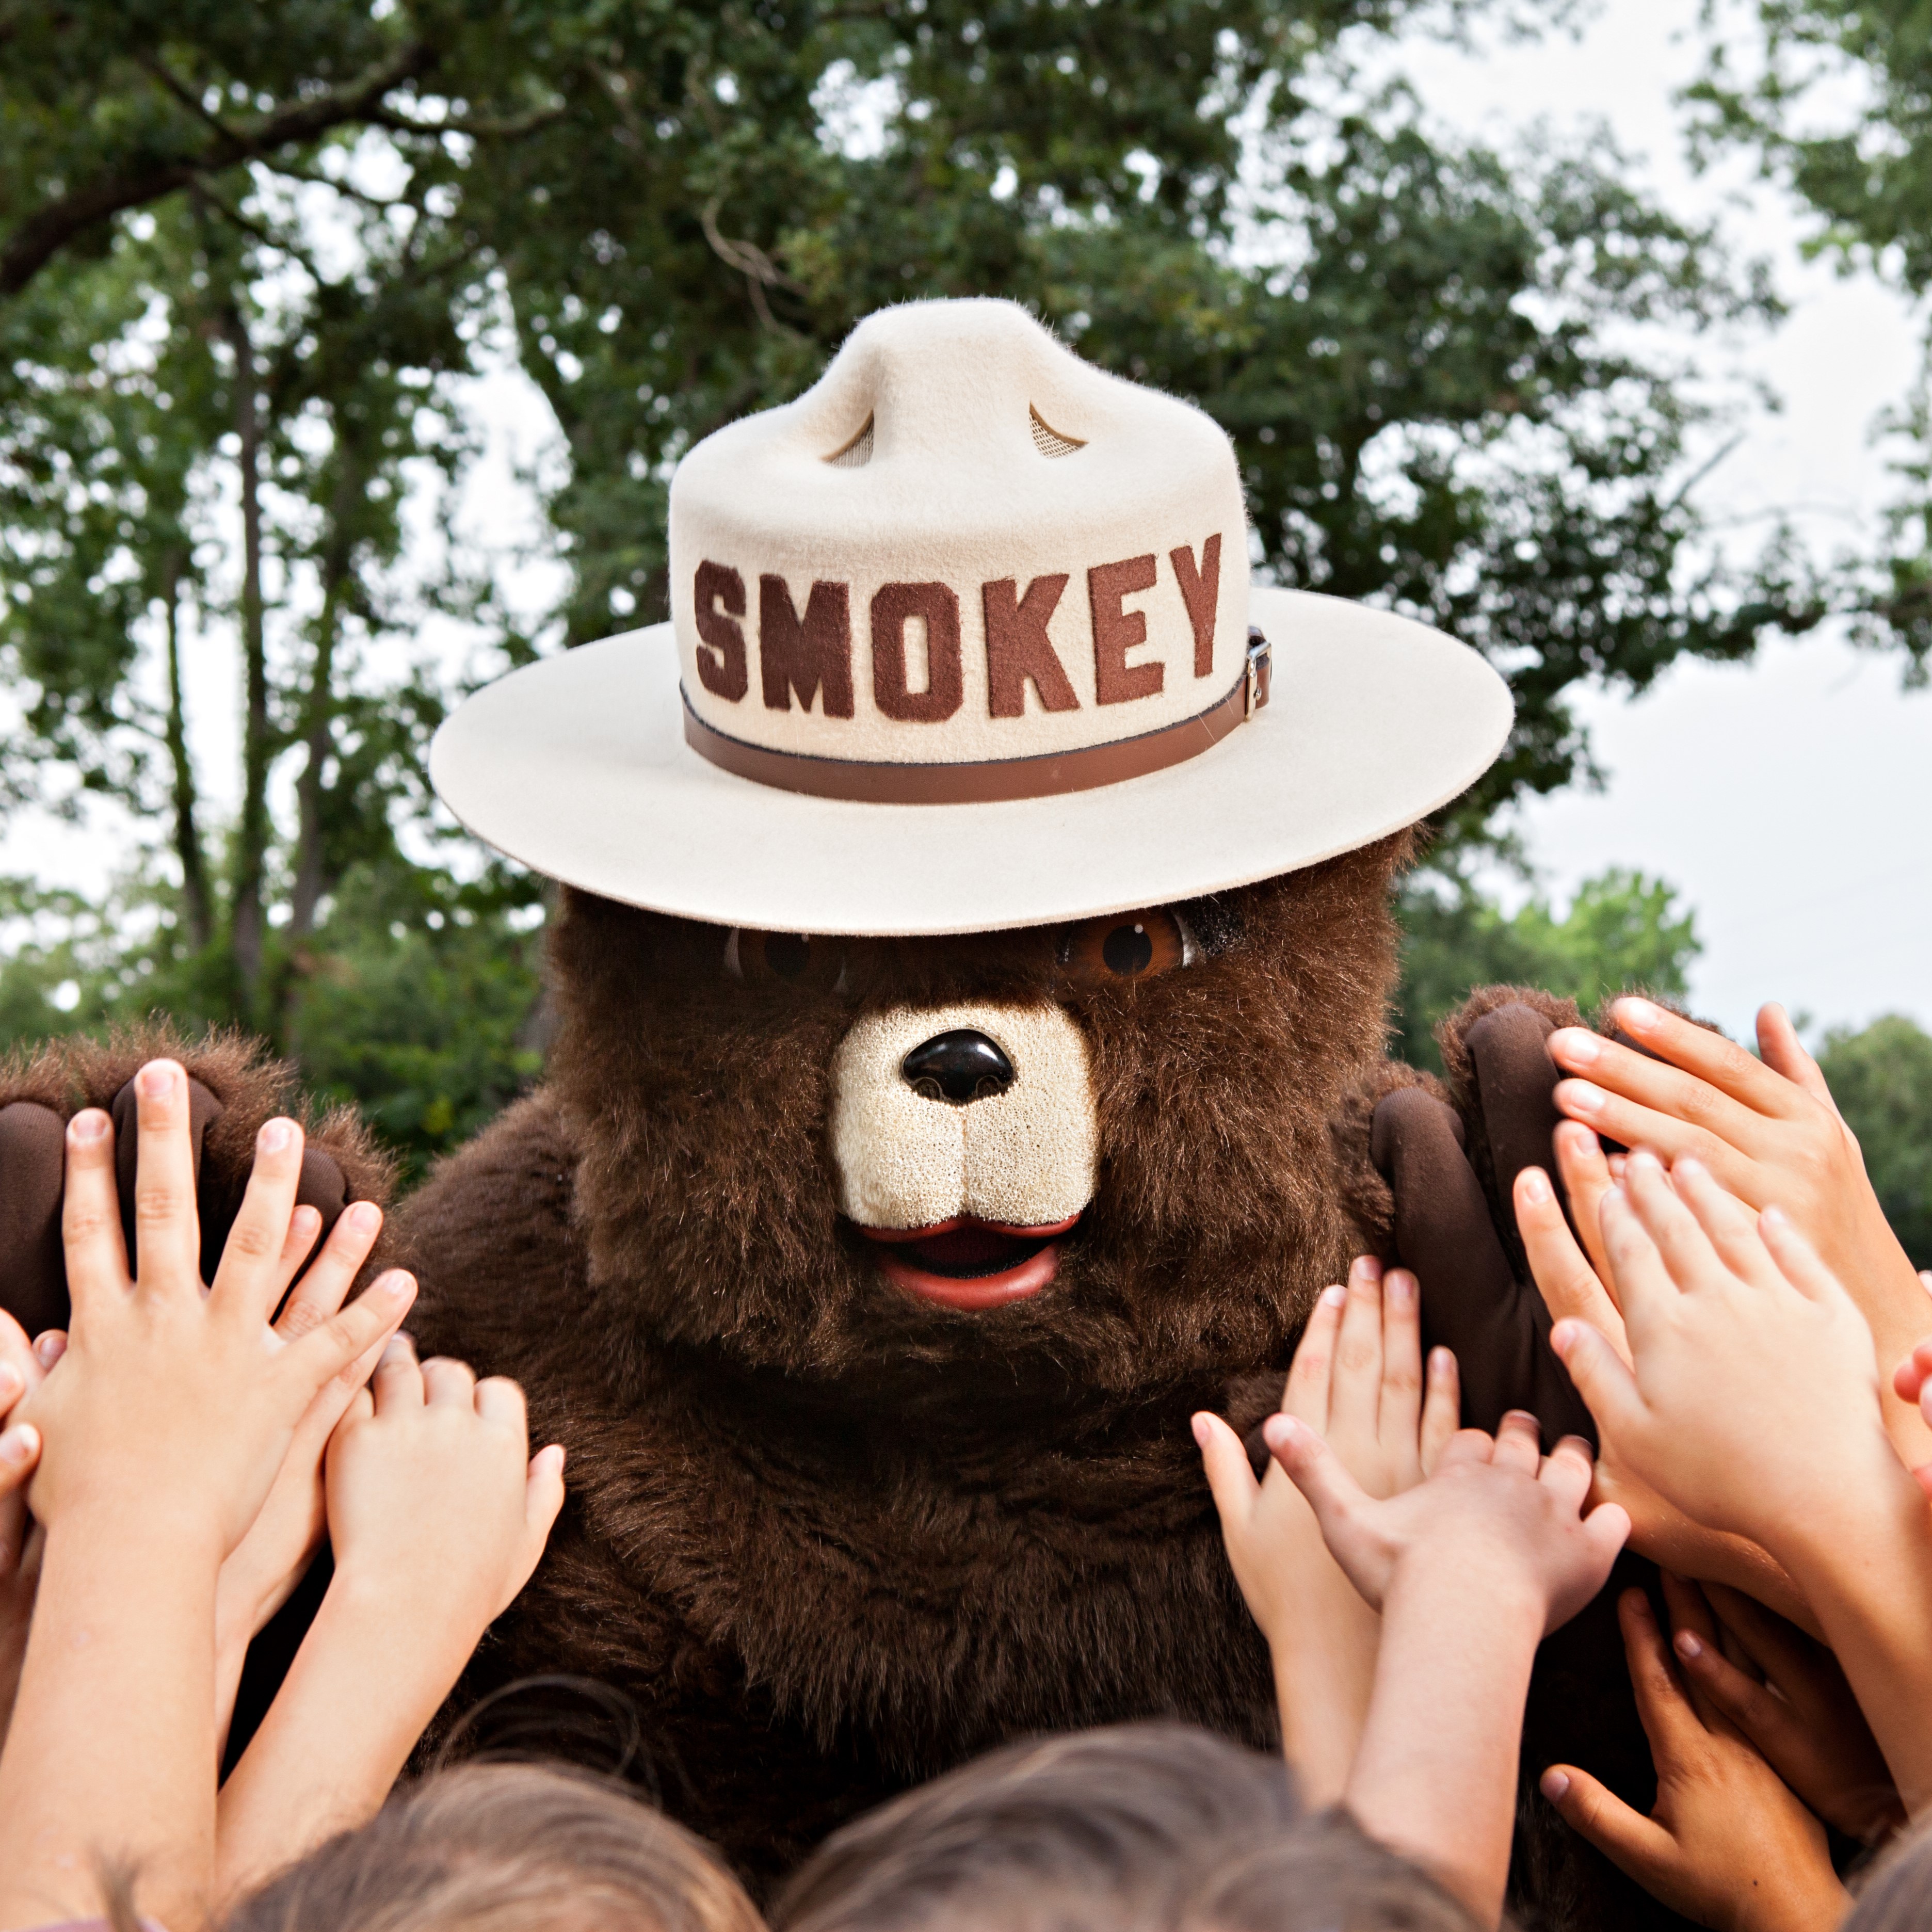 Texas A&M Forest Service encourages Texans to celebrate Smokey Bear’s 79th birthday today by being extremely cautious with all outdoor activities that create heat or sparks.